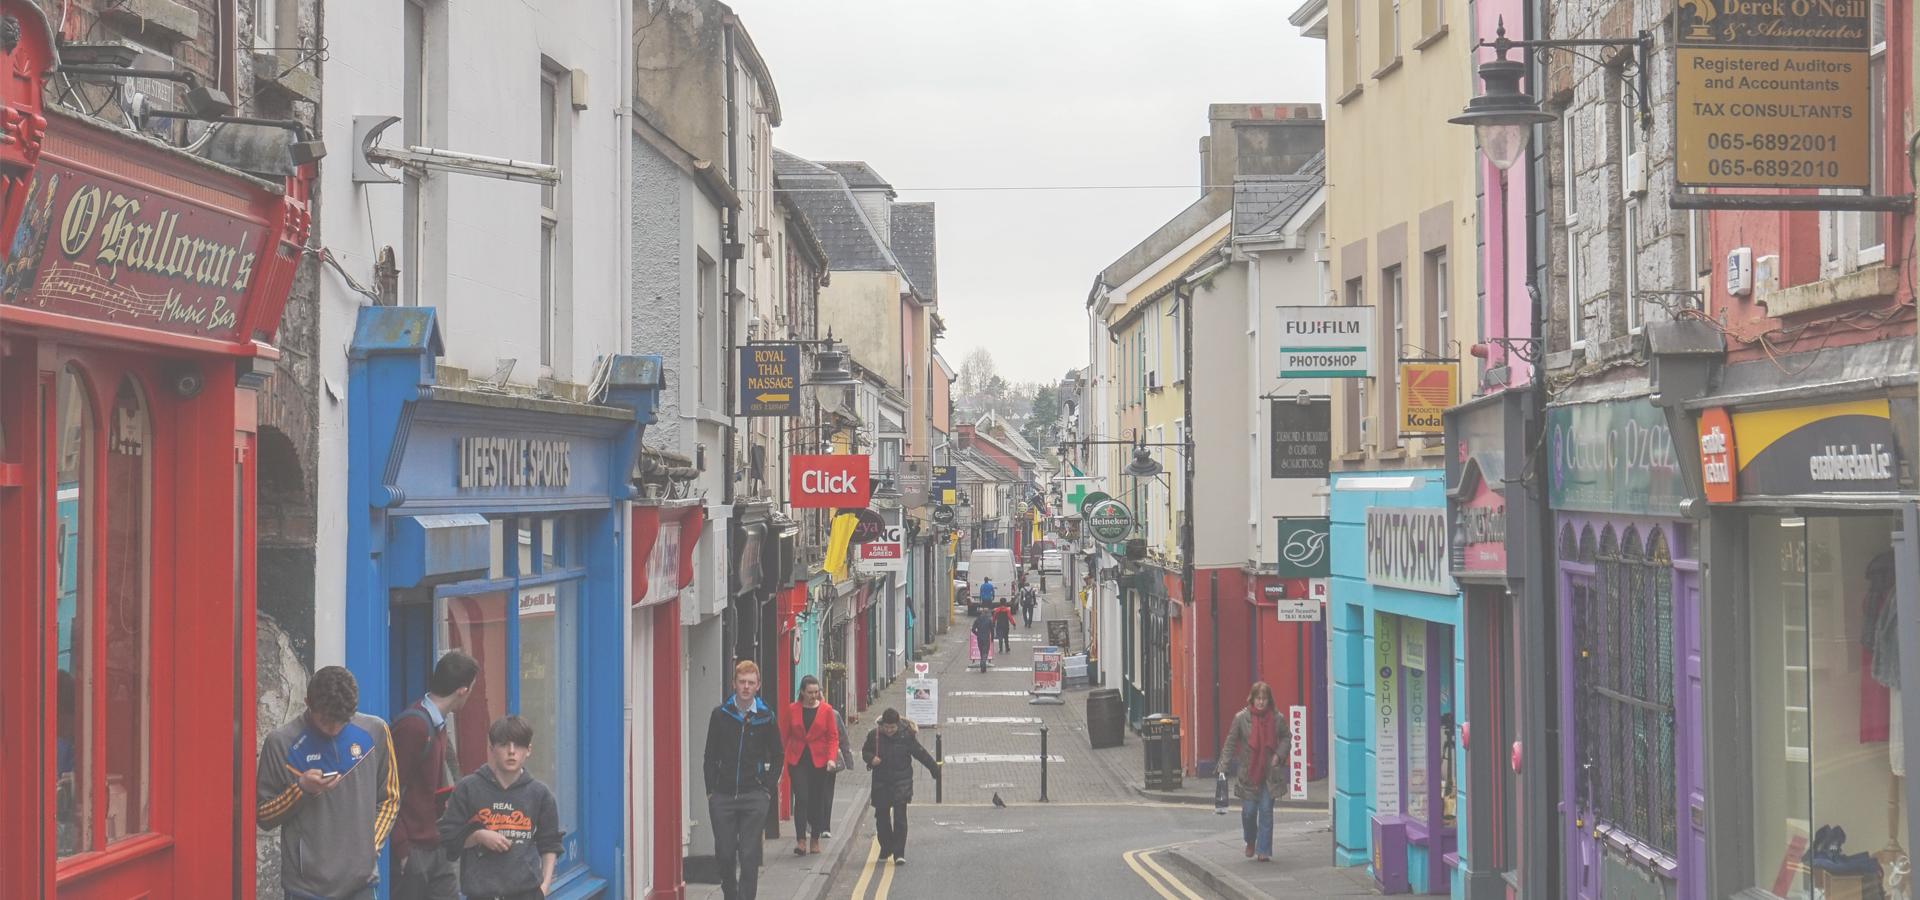 <b>Ennis, County Clare, The Province of Munster, Ireland</b>